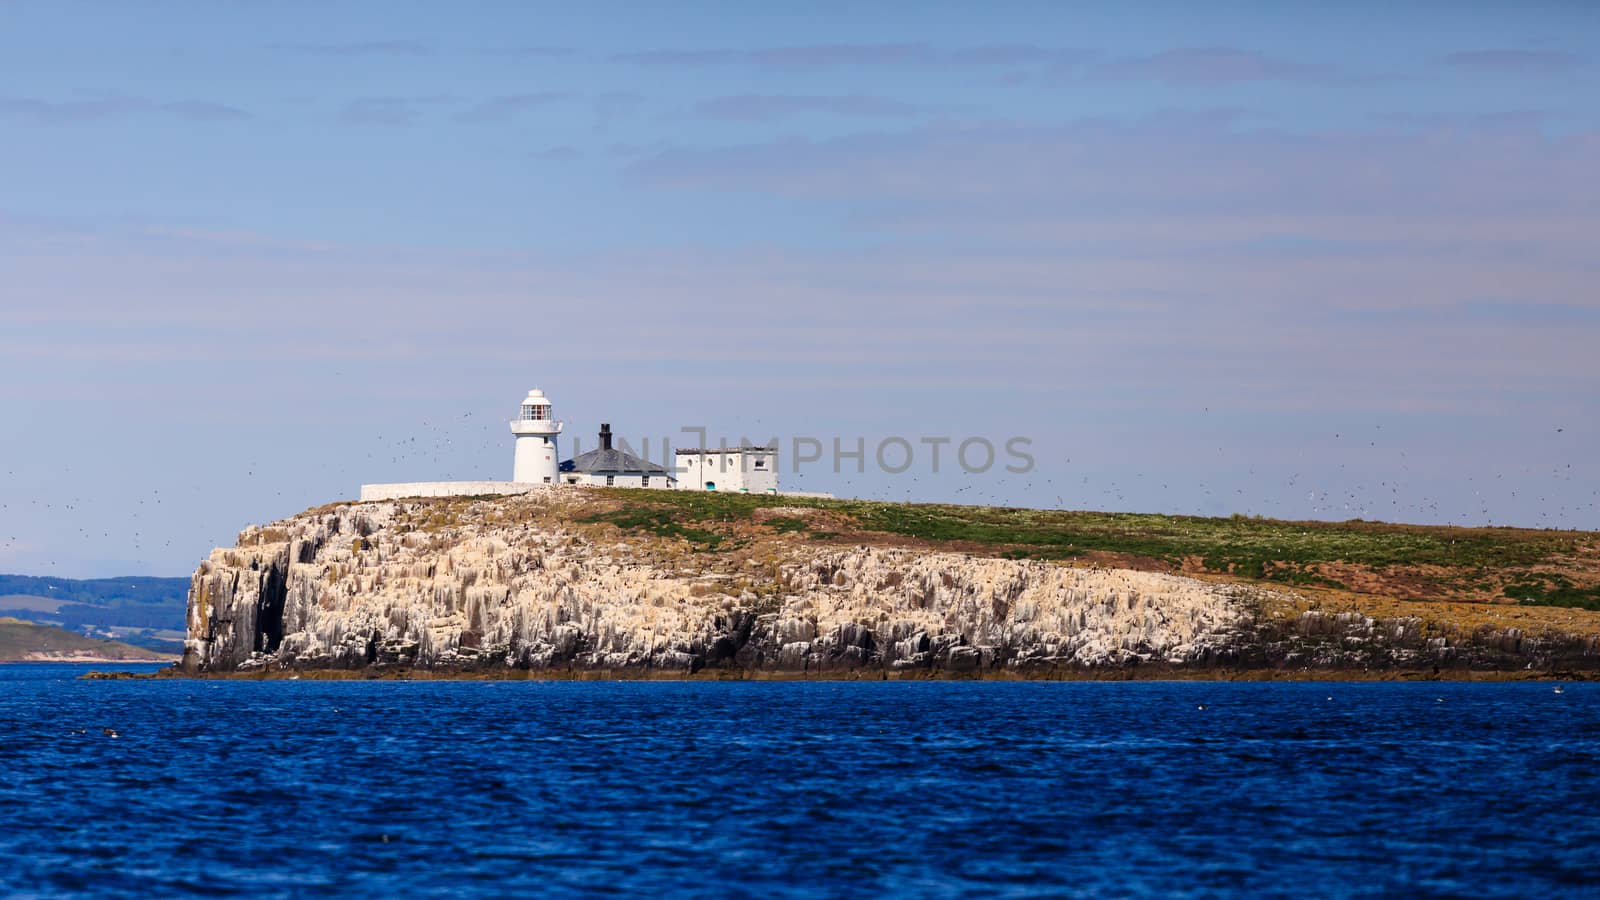 This lighthouse is situated on the Inner Farne Islands on the Northumberland Coast in Northern England.